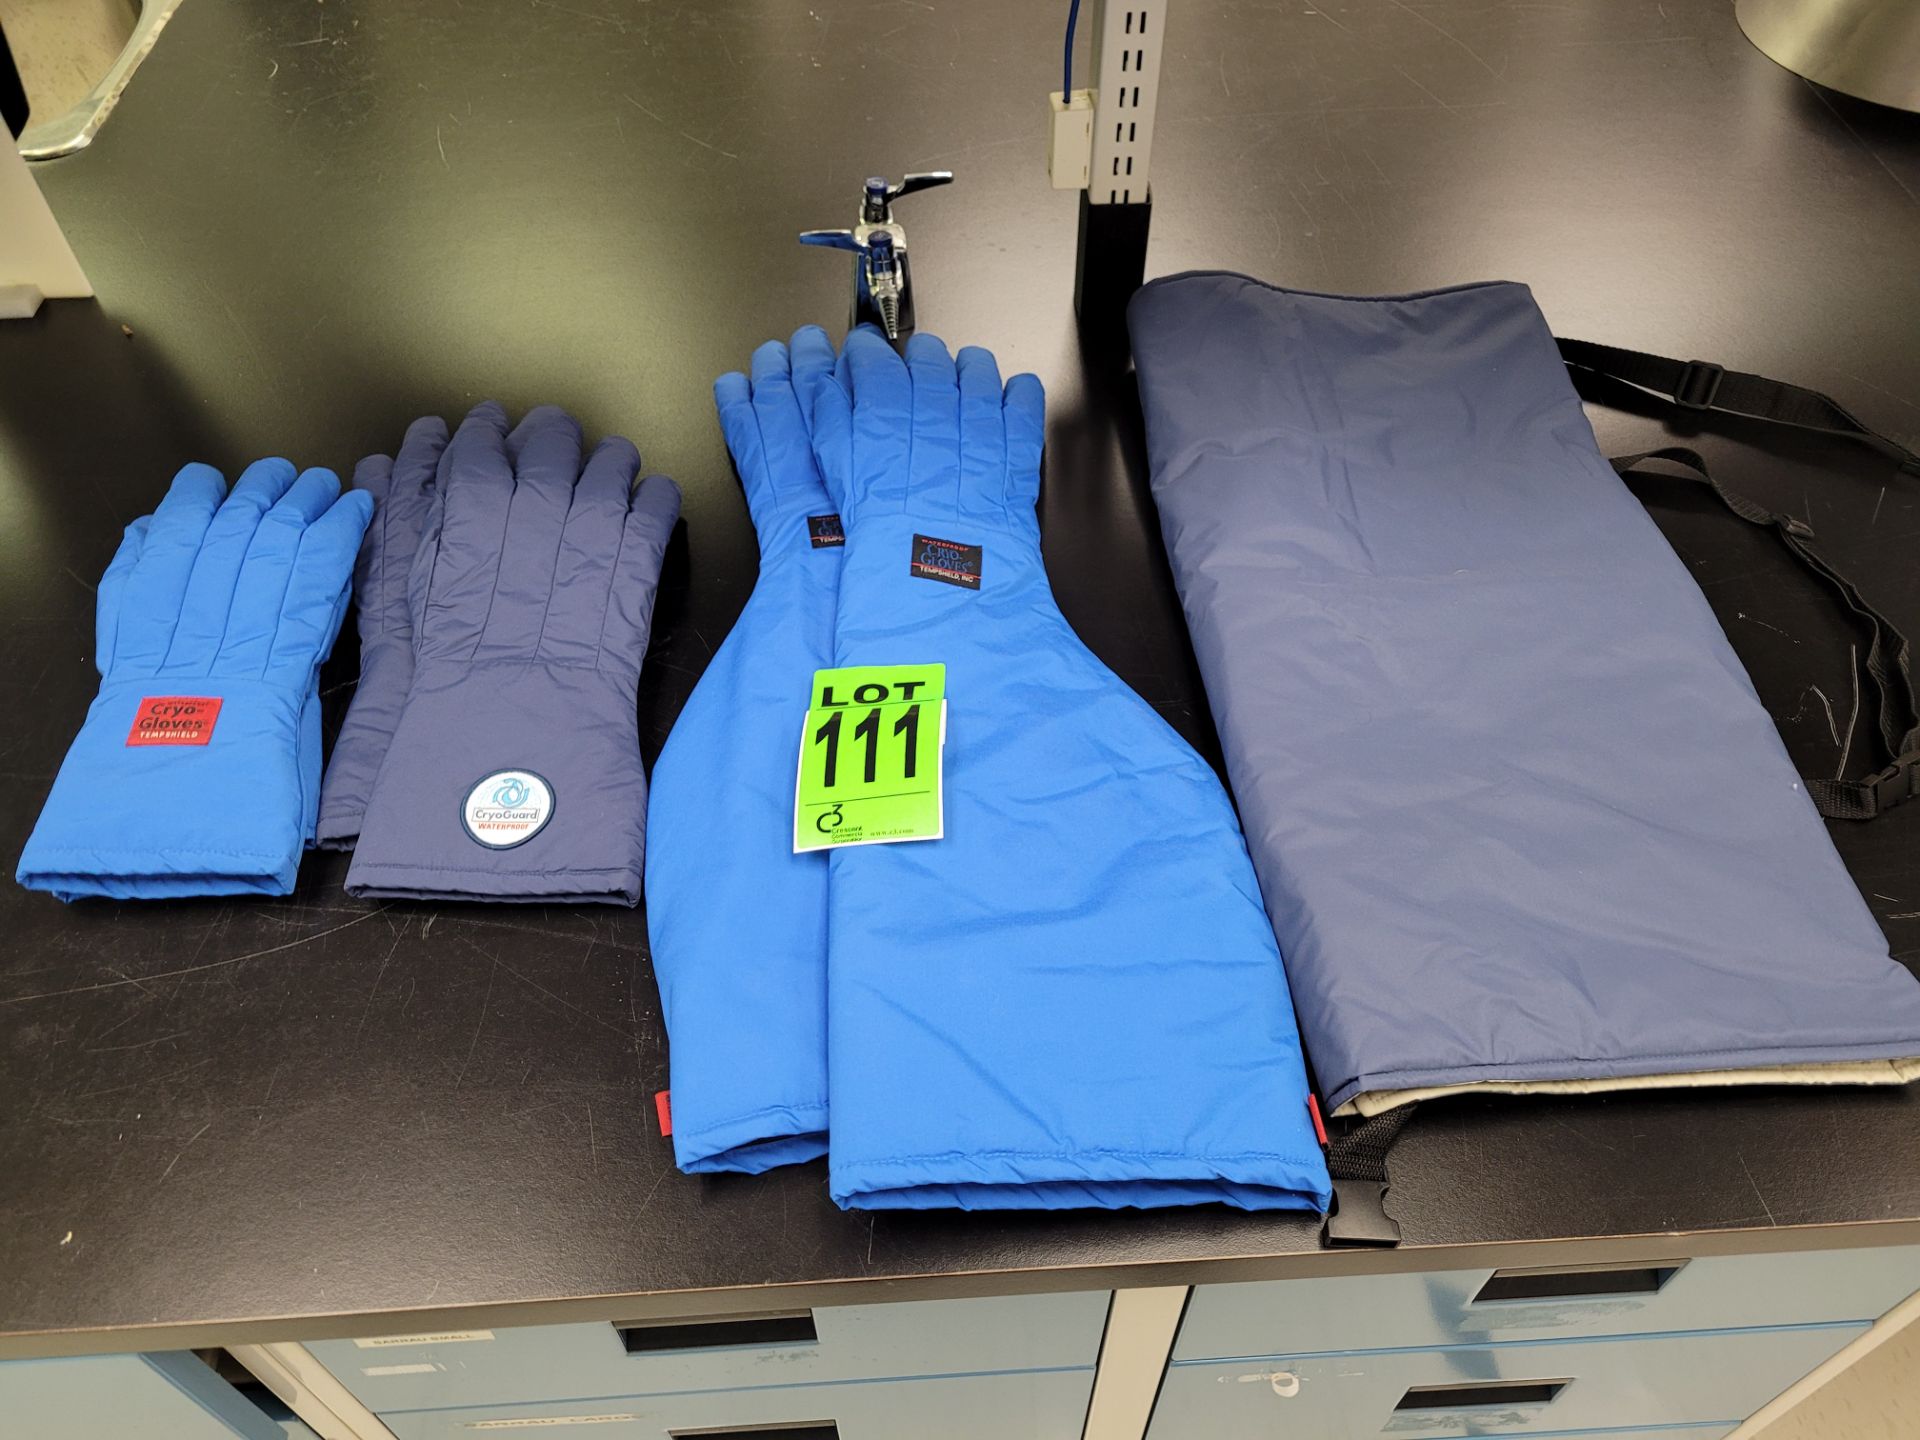 (3) pairs of CRYO-GLOVES / CRYOGUARD cold/waterproof laboratory handling gloves and apron